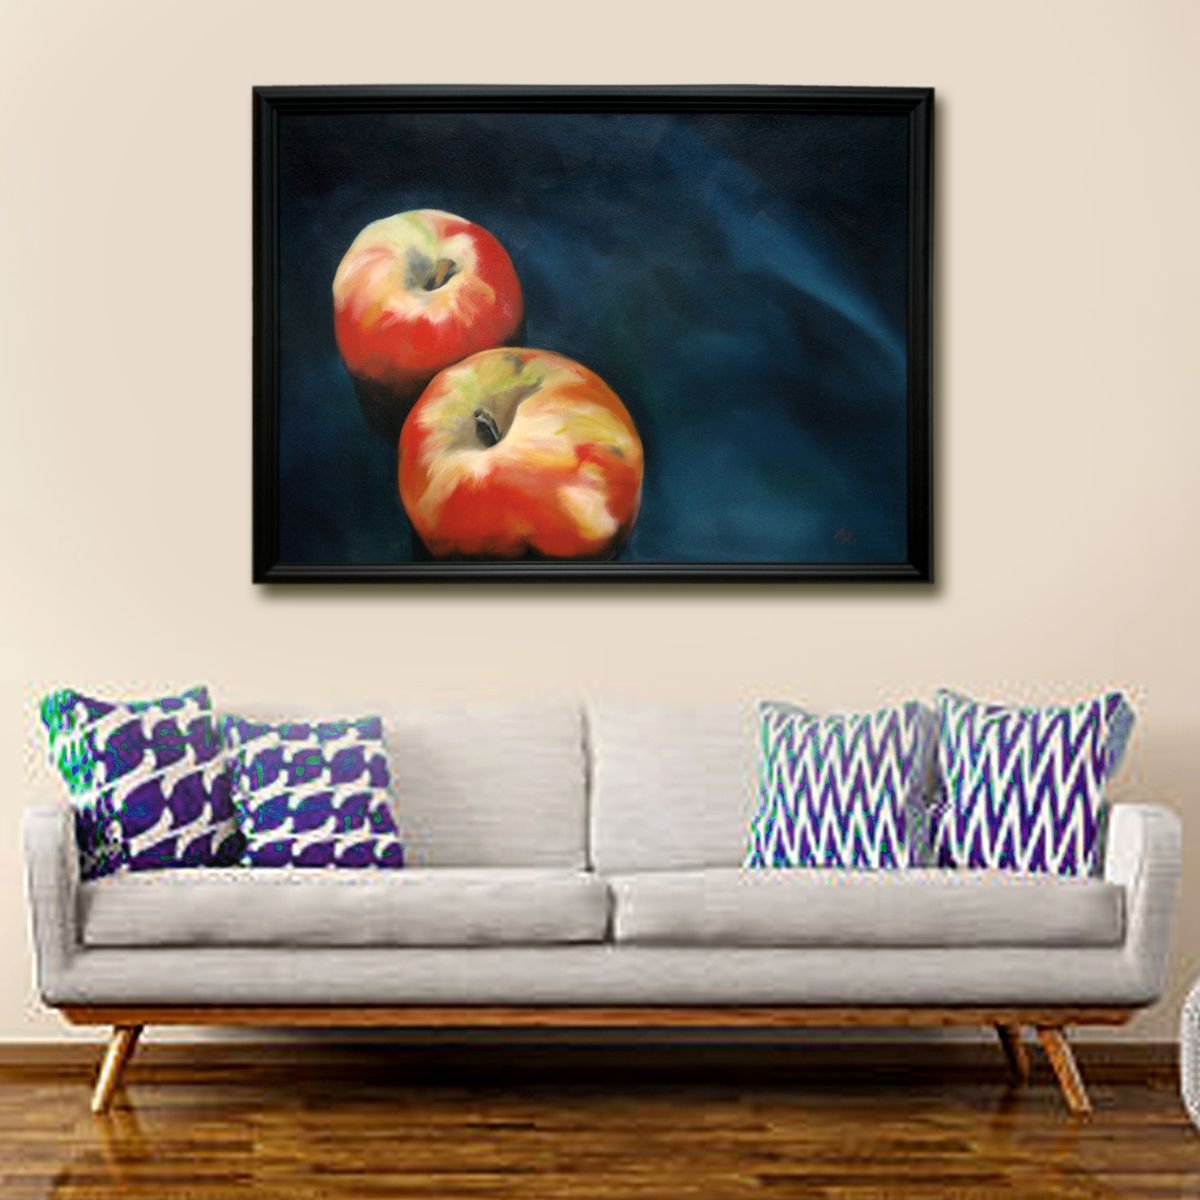 Still Life - Two Apples (i) by Matthew Withey